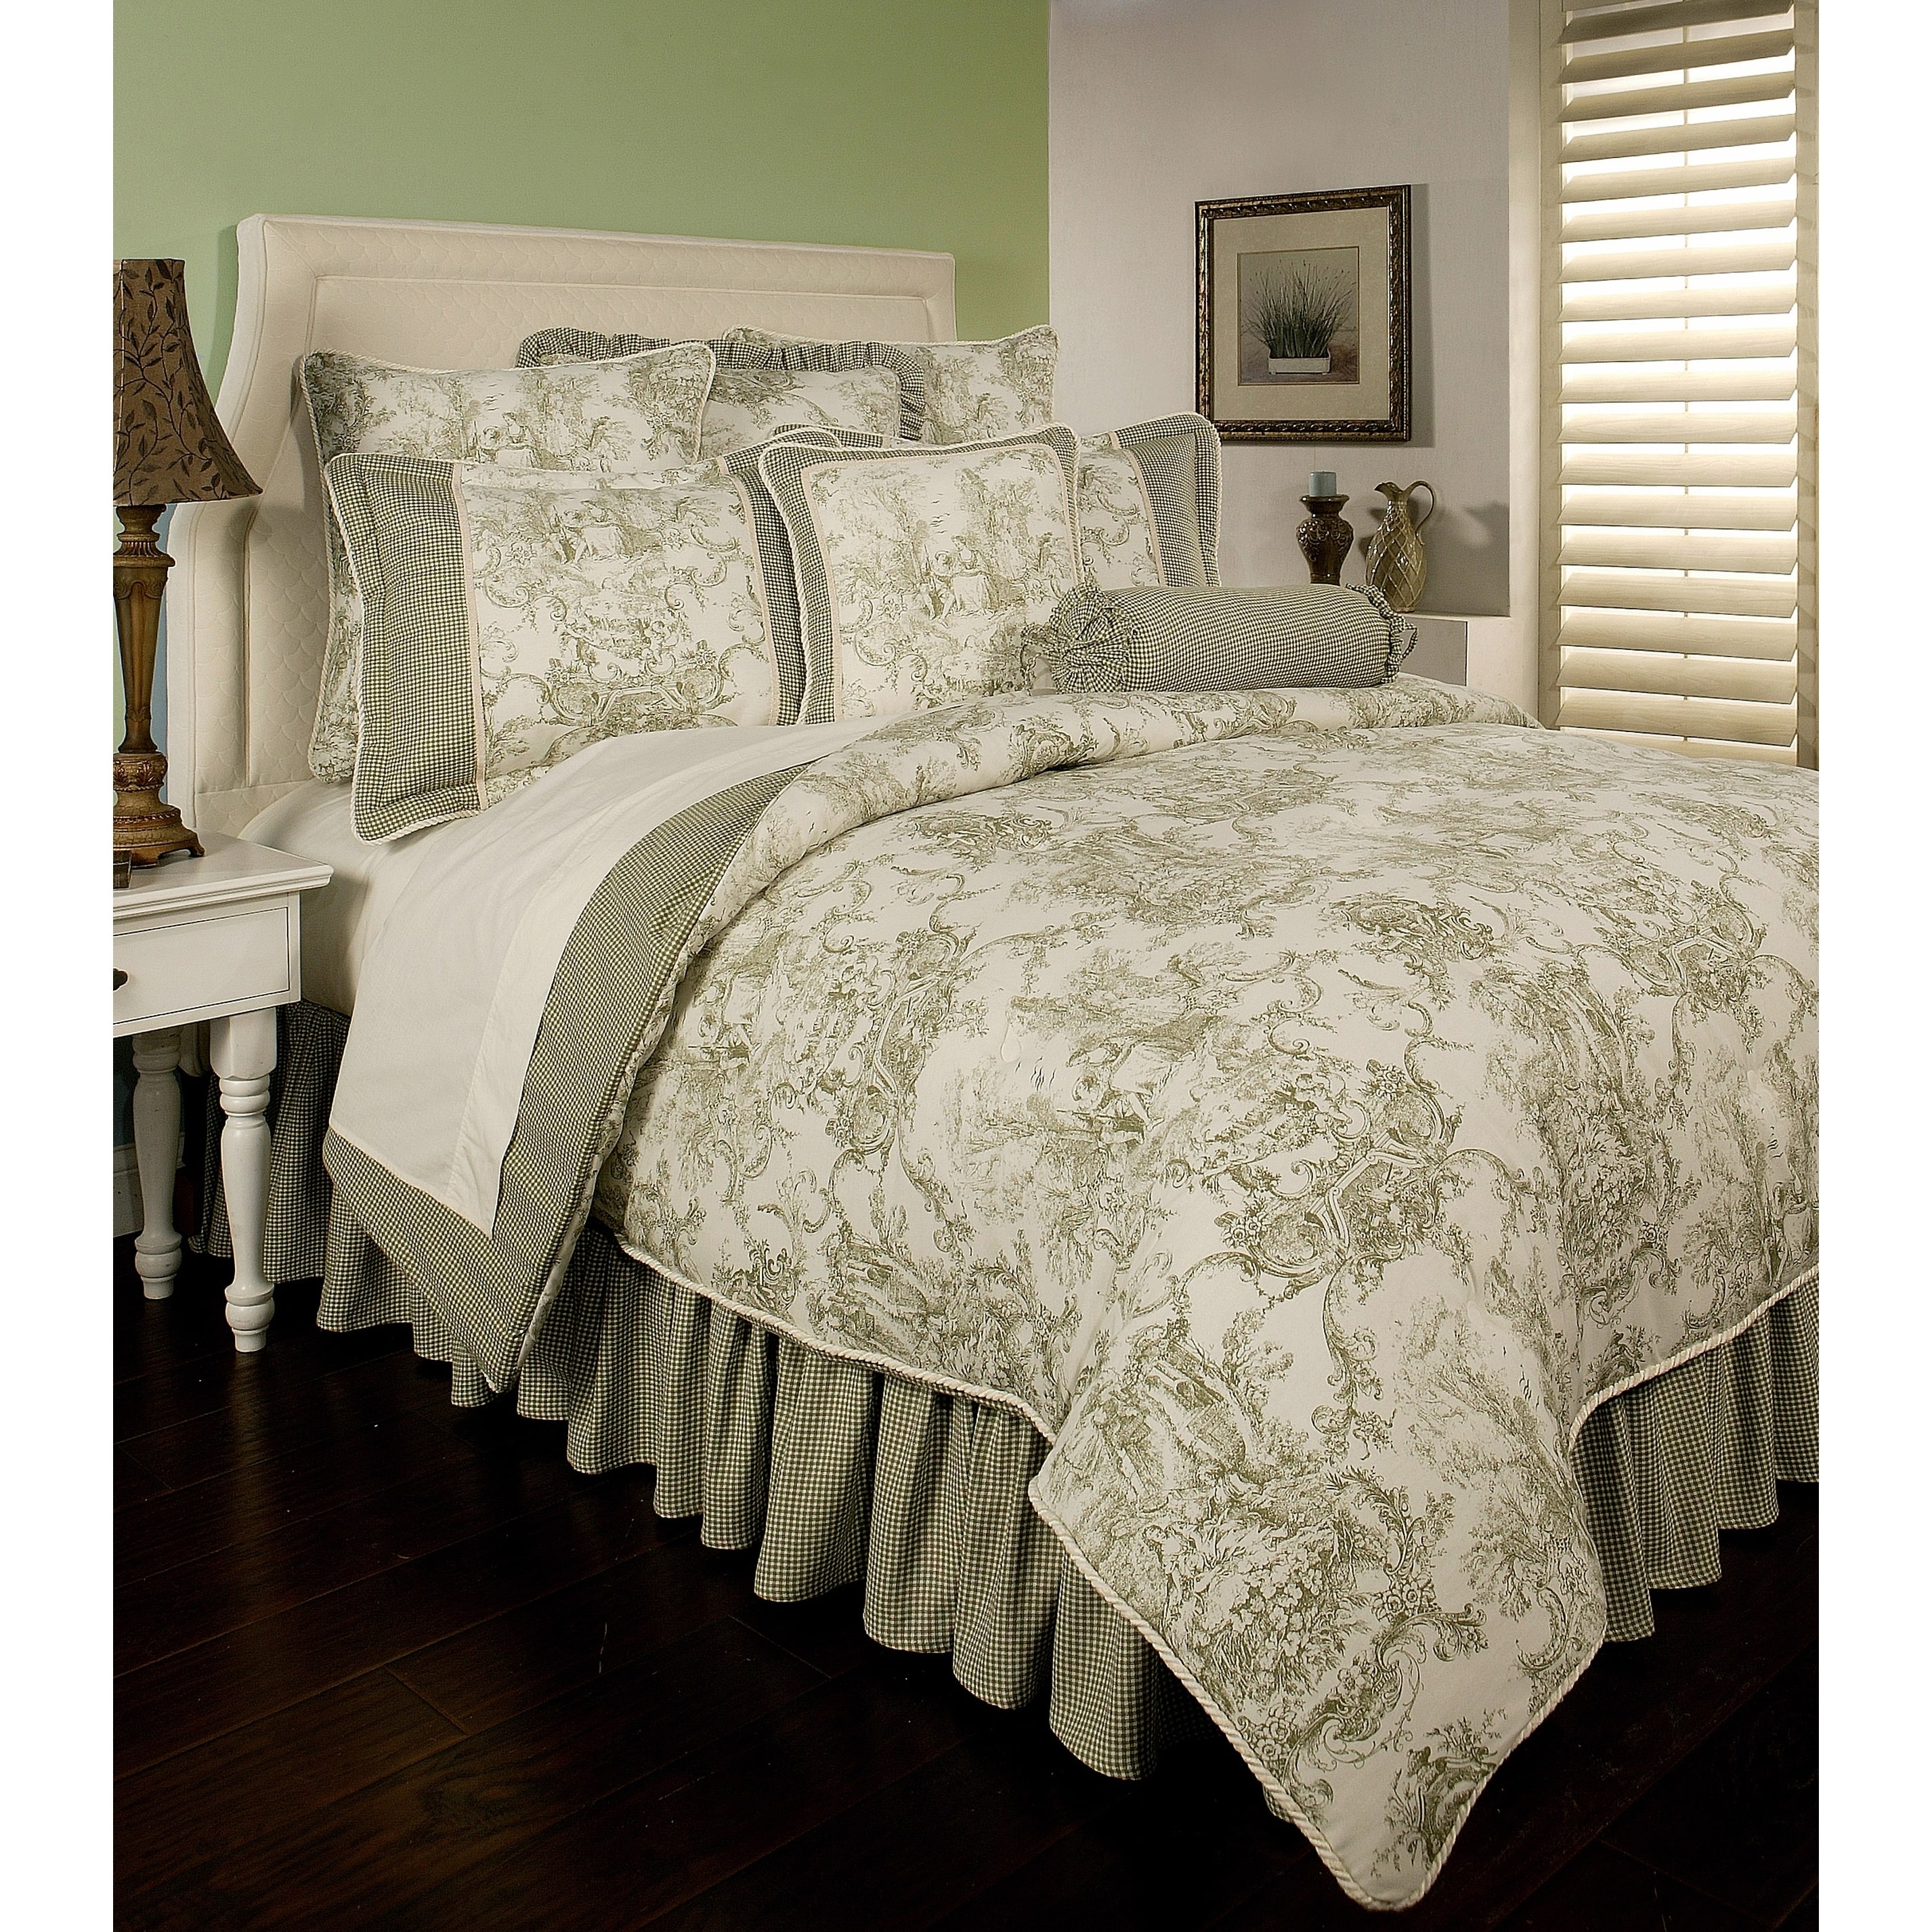 Shop Pchf Country Toile Sage 3 Piece Duvet Set Overstock